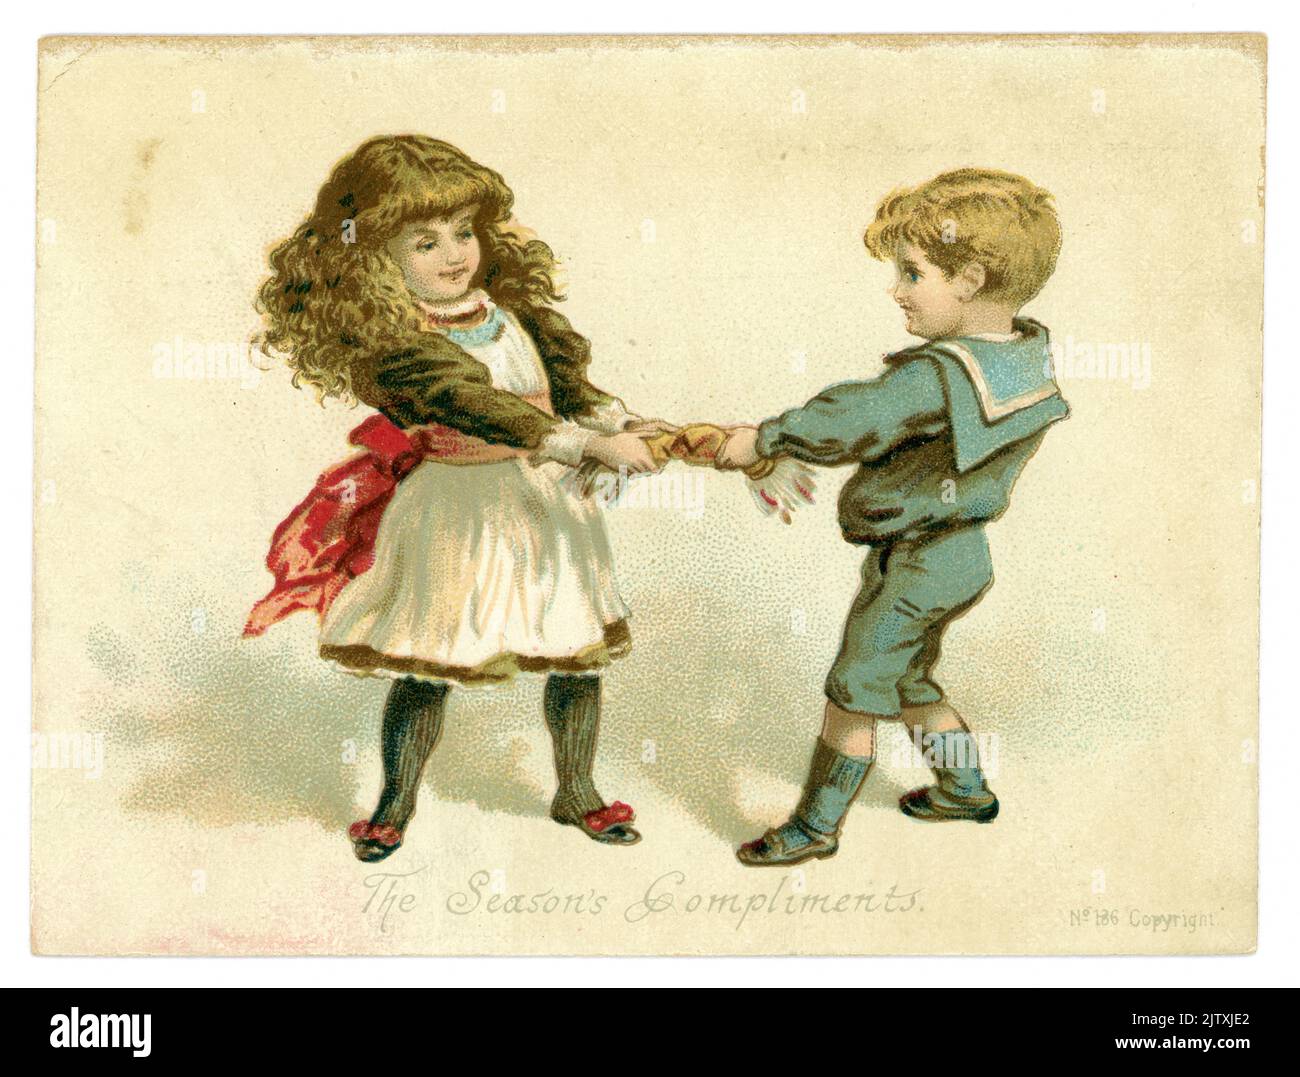 Original, charming Victorian Christmas card, greetings card of young Victorian boy and girl pulling a cracker. The boy is dressed in a sailor suit, the girl has long hair in waves, the caption is 'The Season's Compliments', dated 1887, U.K. Stock Photo